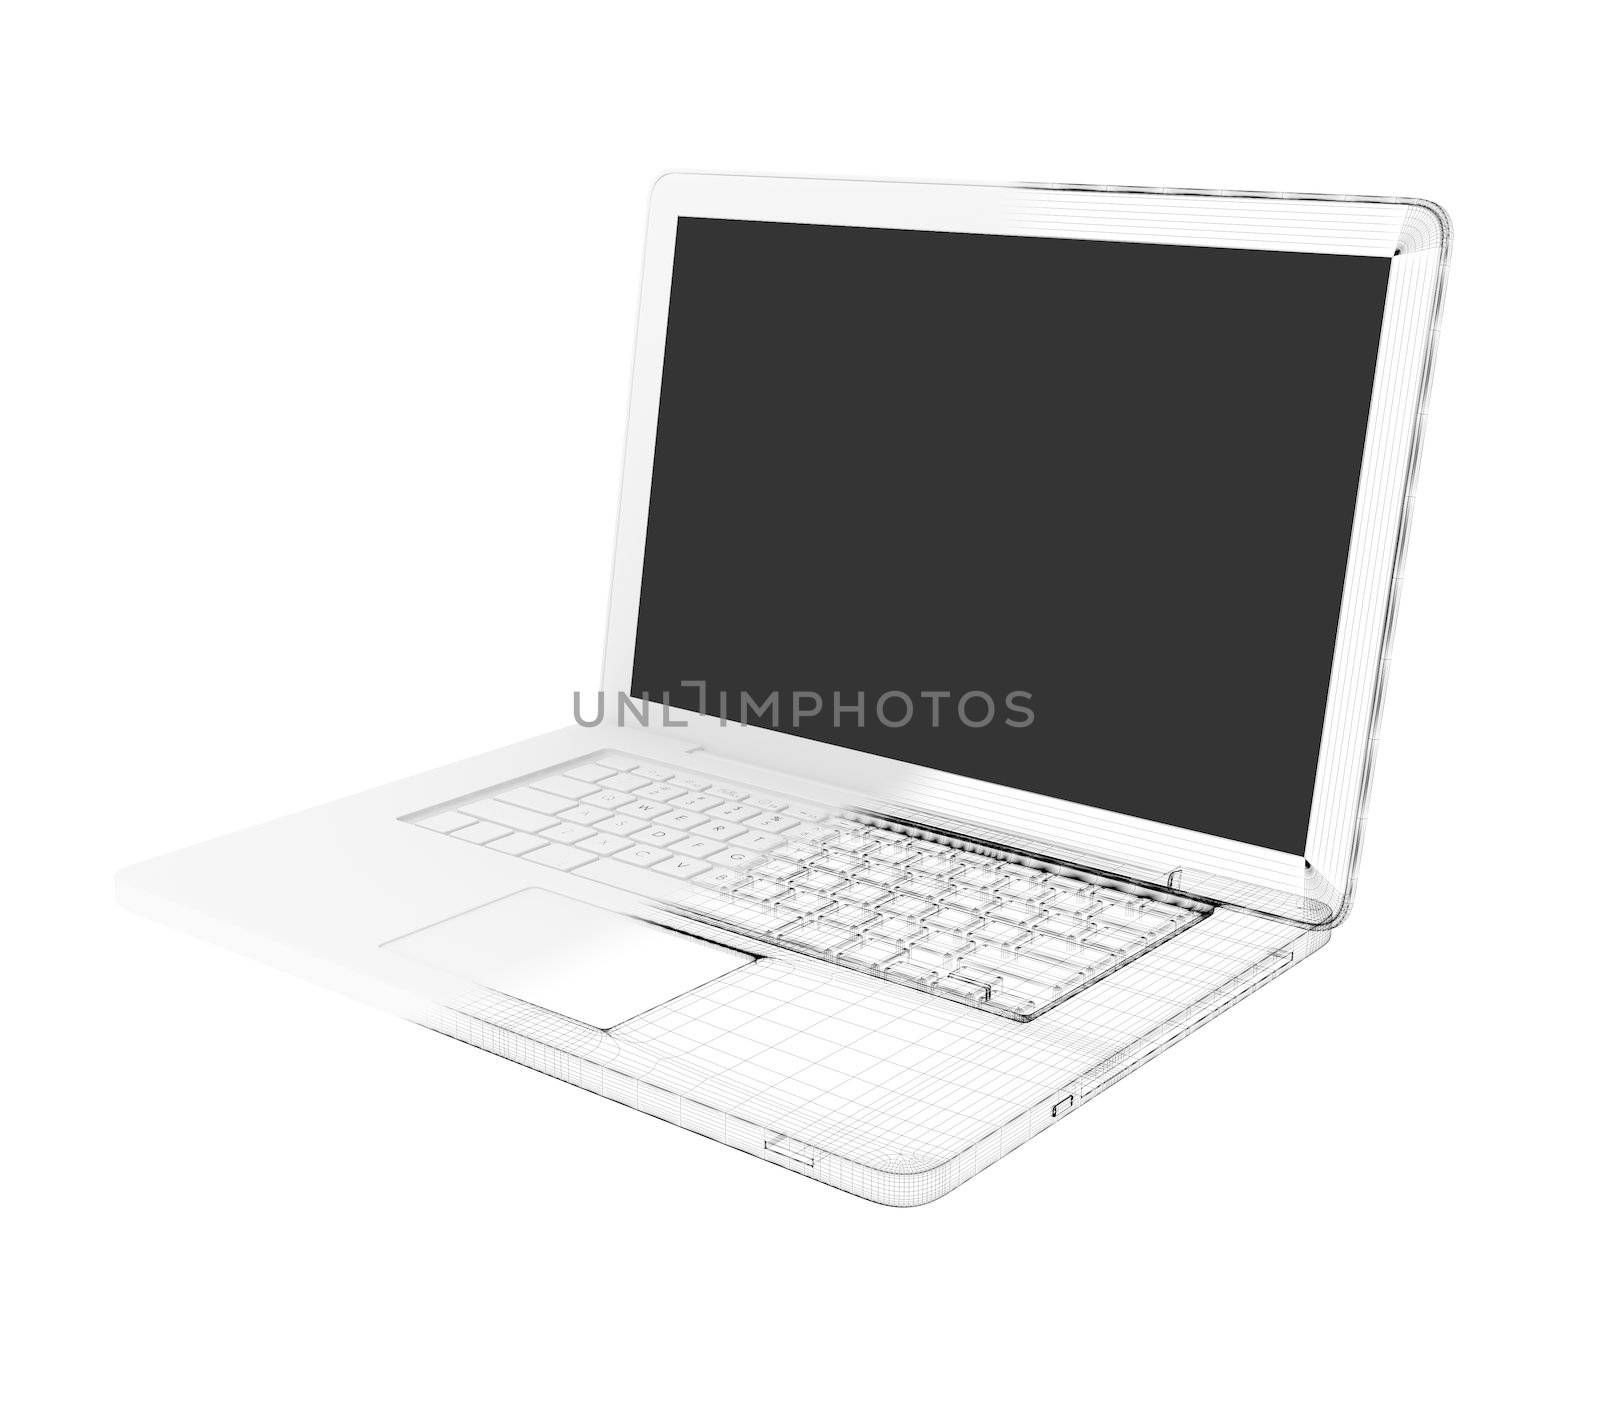 Half of the laptop - wire-frame. Isolated render on a white background